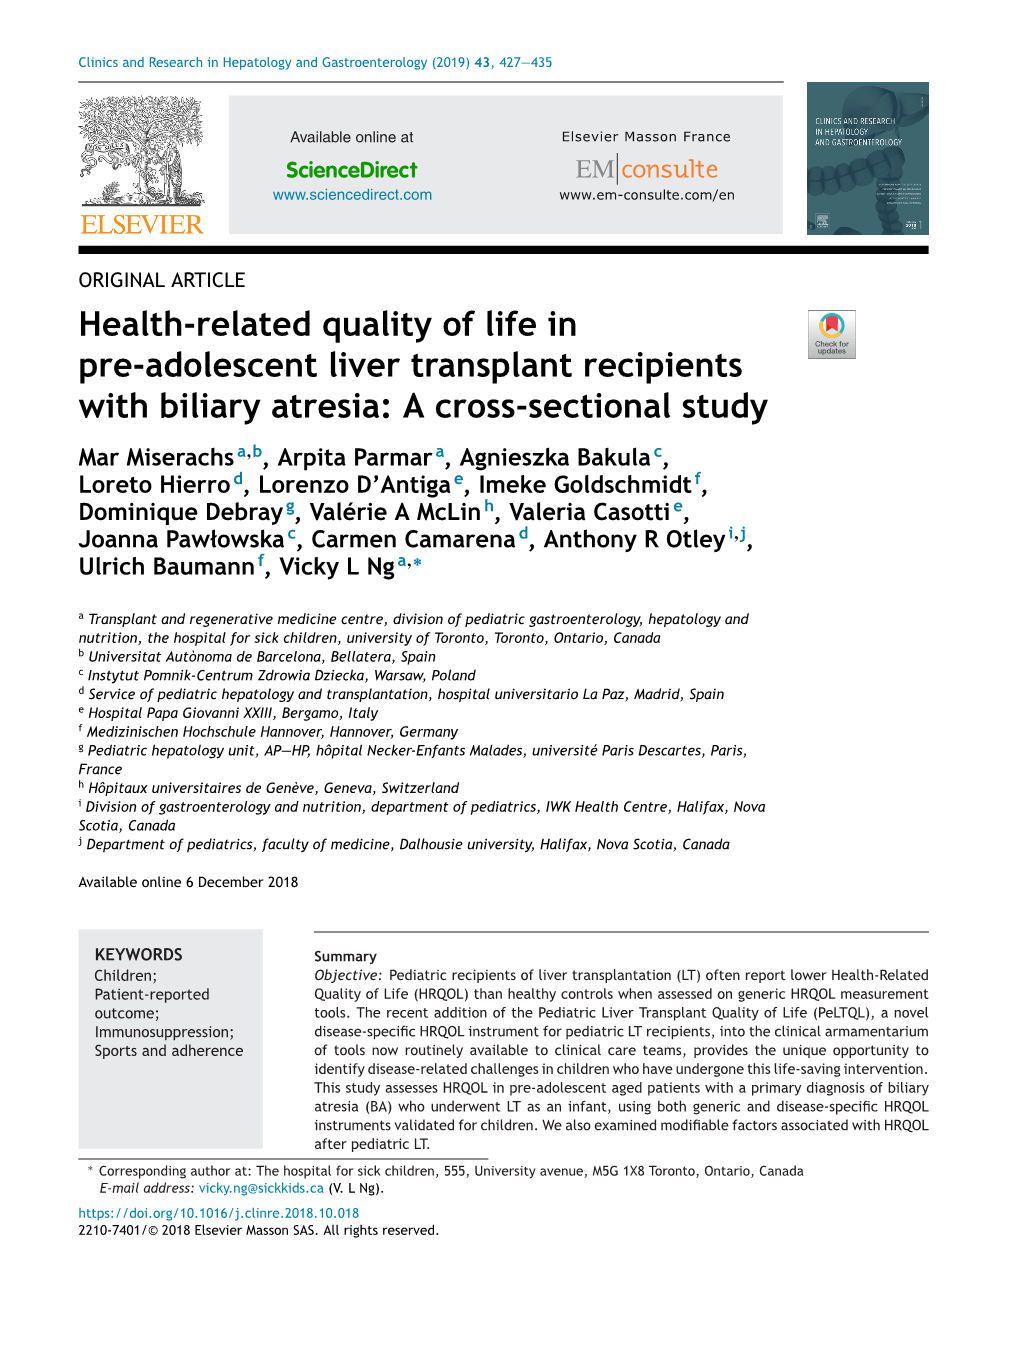 Health-Related Quality of Life in Pre-Adolescent Liver Transplant Recipients with Biliary Atresia: a Cross-Sectional Study 429